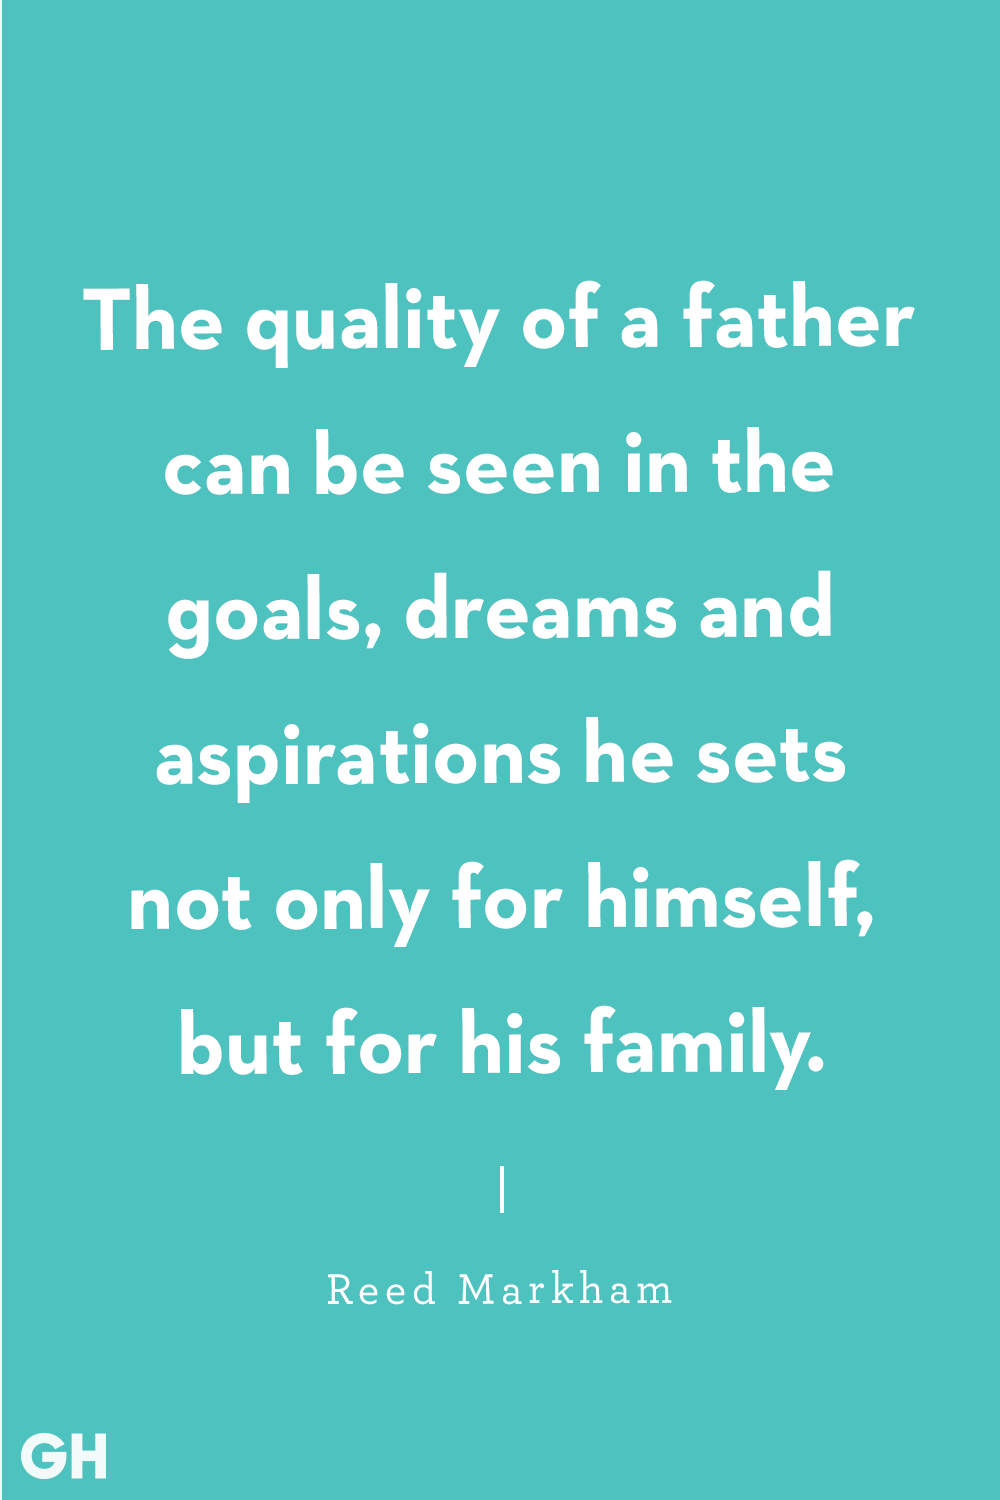 40 Best Father S Day Quotes Happy Father S Day Sayings For Dad